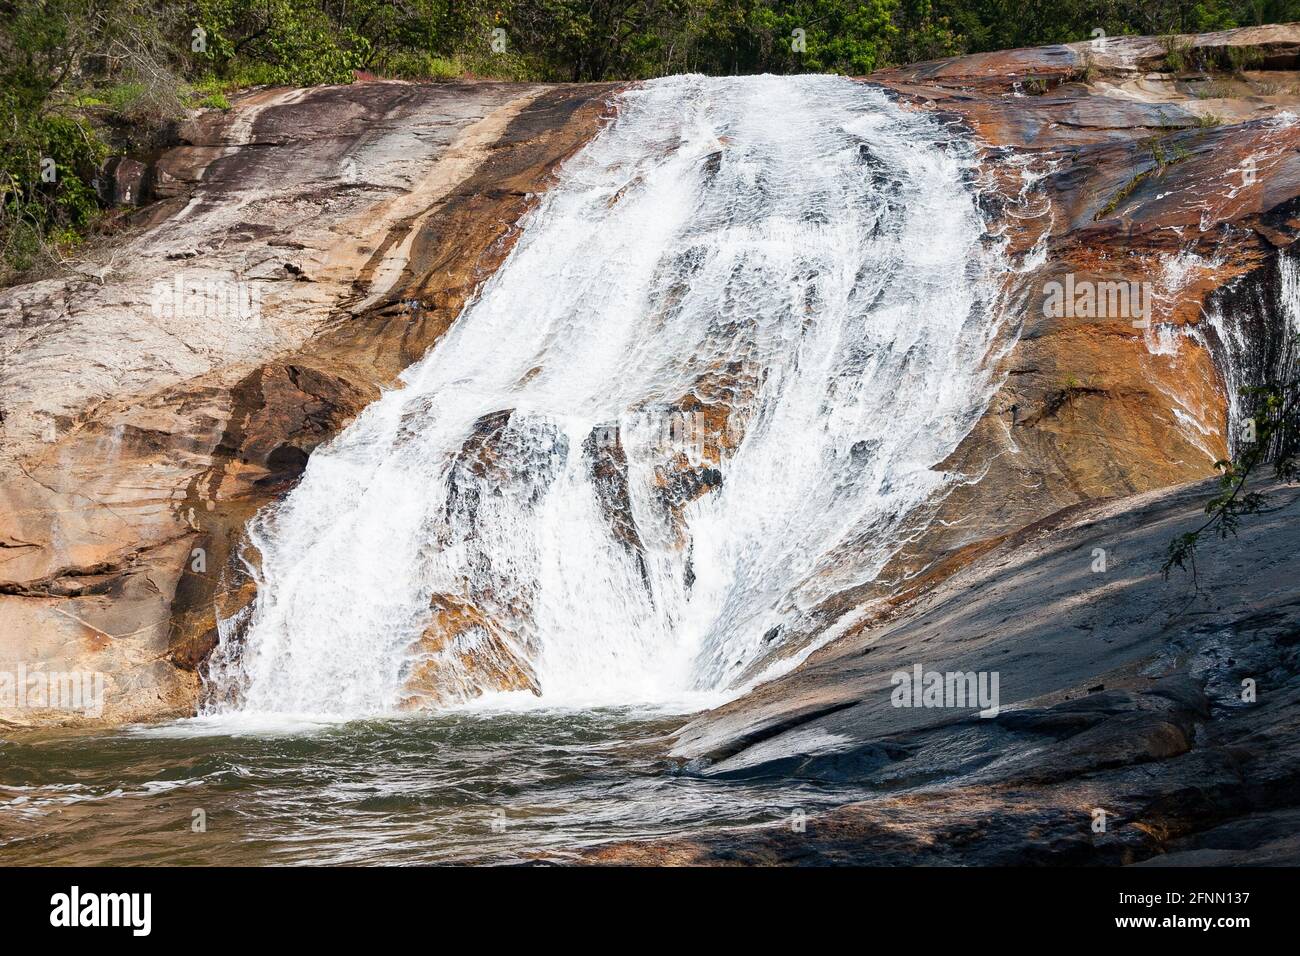 Small waterfall over colored rocks near Debegeni Falls, Limpopo, South Africa Stock Photo